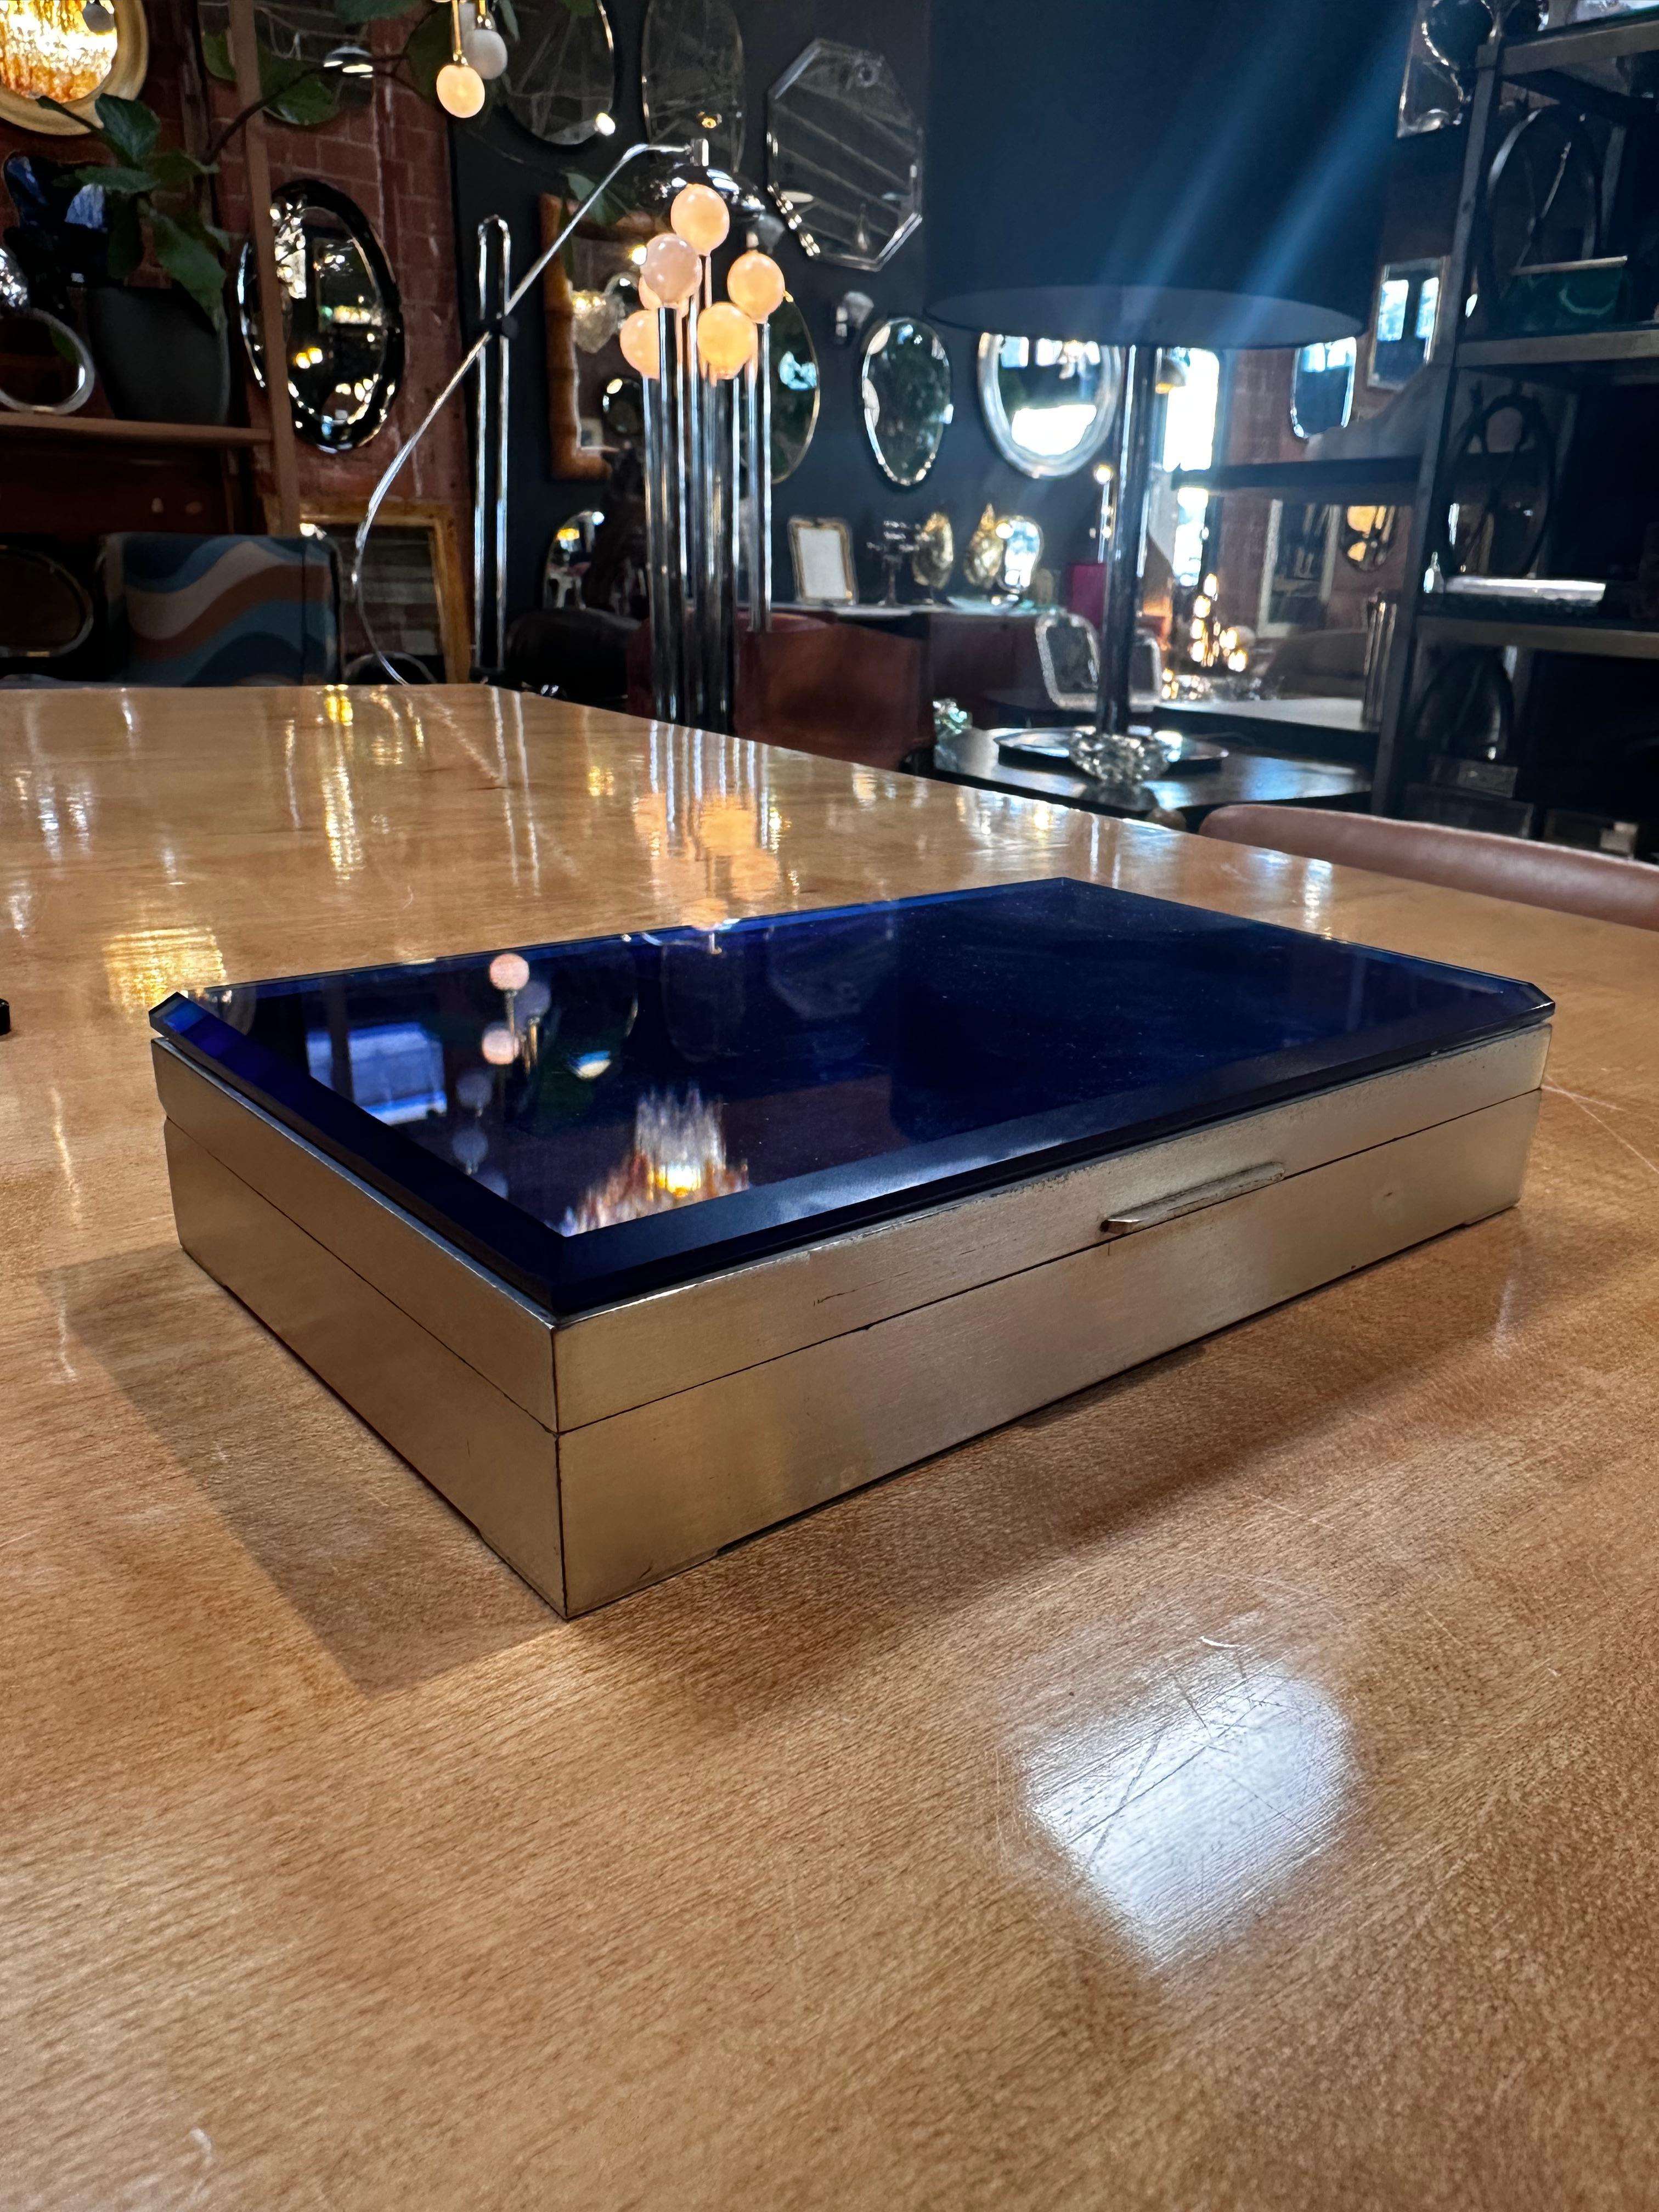 The Vintage Decorative Unique Blue Box from the 1960s, featuring a blue top glass and chrome base, is a stylish and distinctive retro piece. Crafted in the mid-20th century, the combination of the vibrant blue glass and sleek chrome base creates a